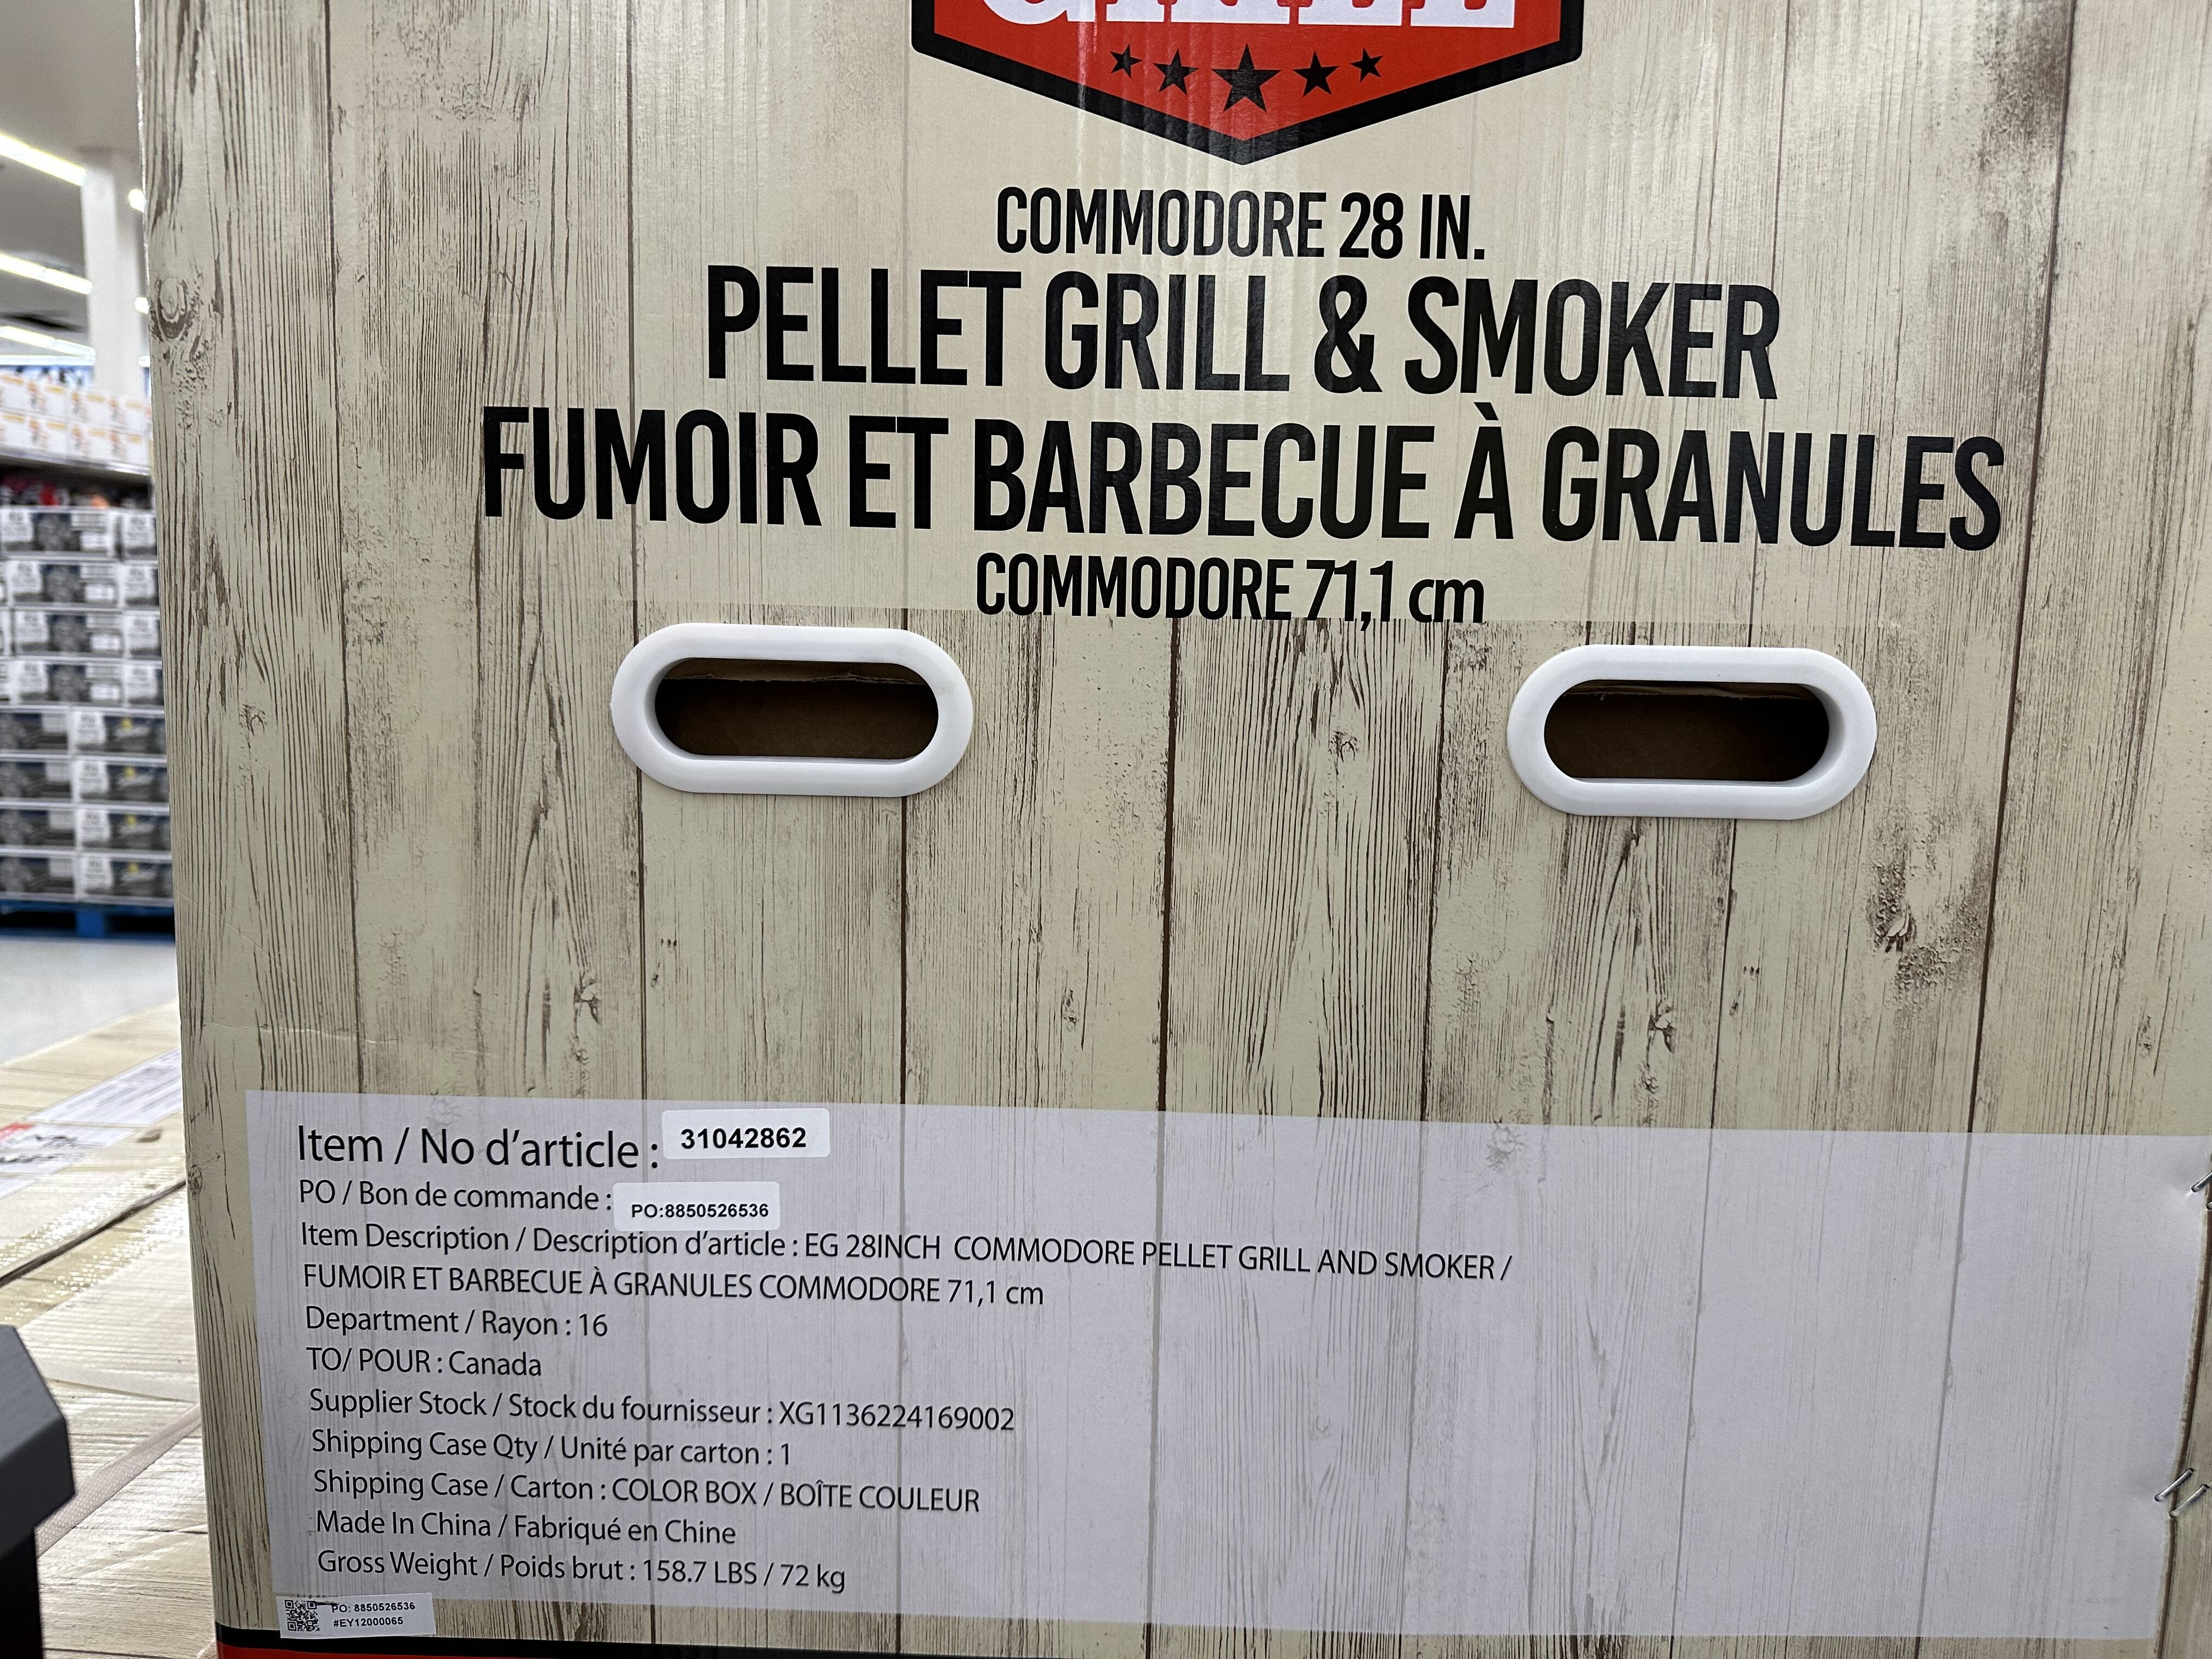 Got an Expert Commodore Pellet Grill and Smoker for free. It was